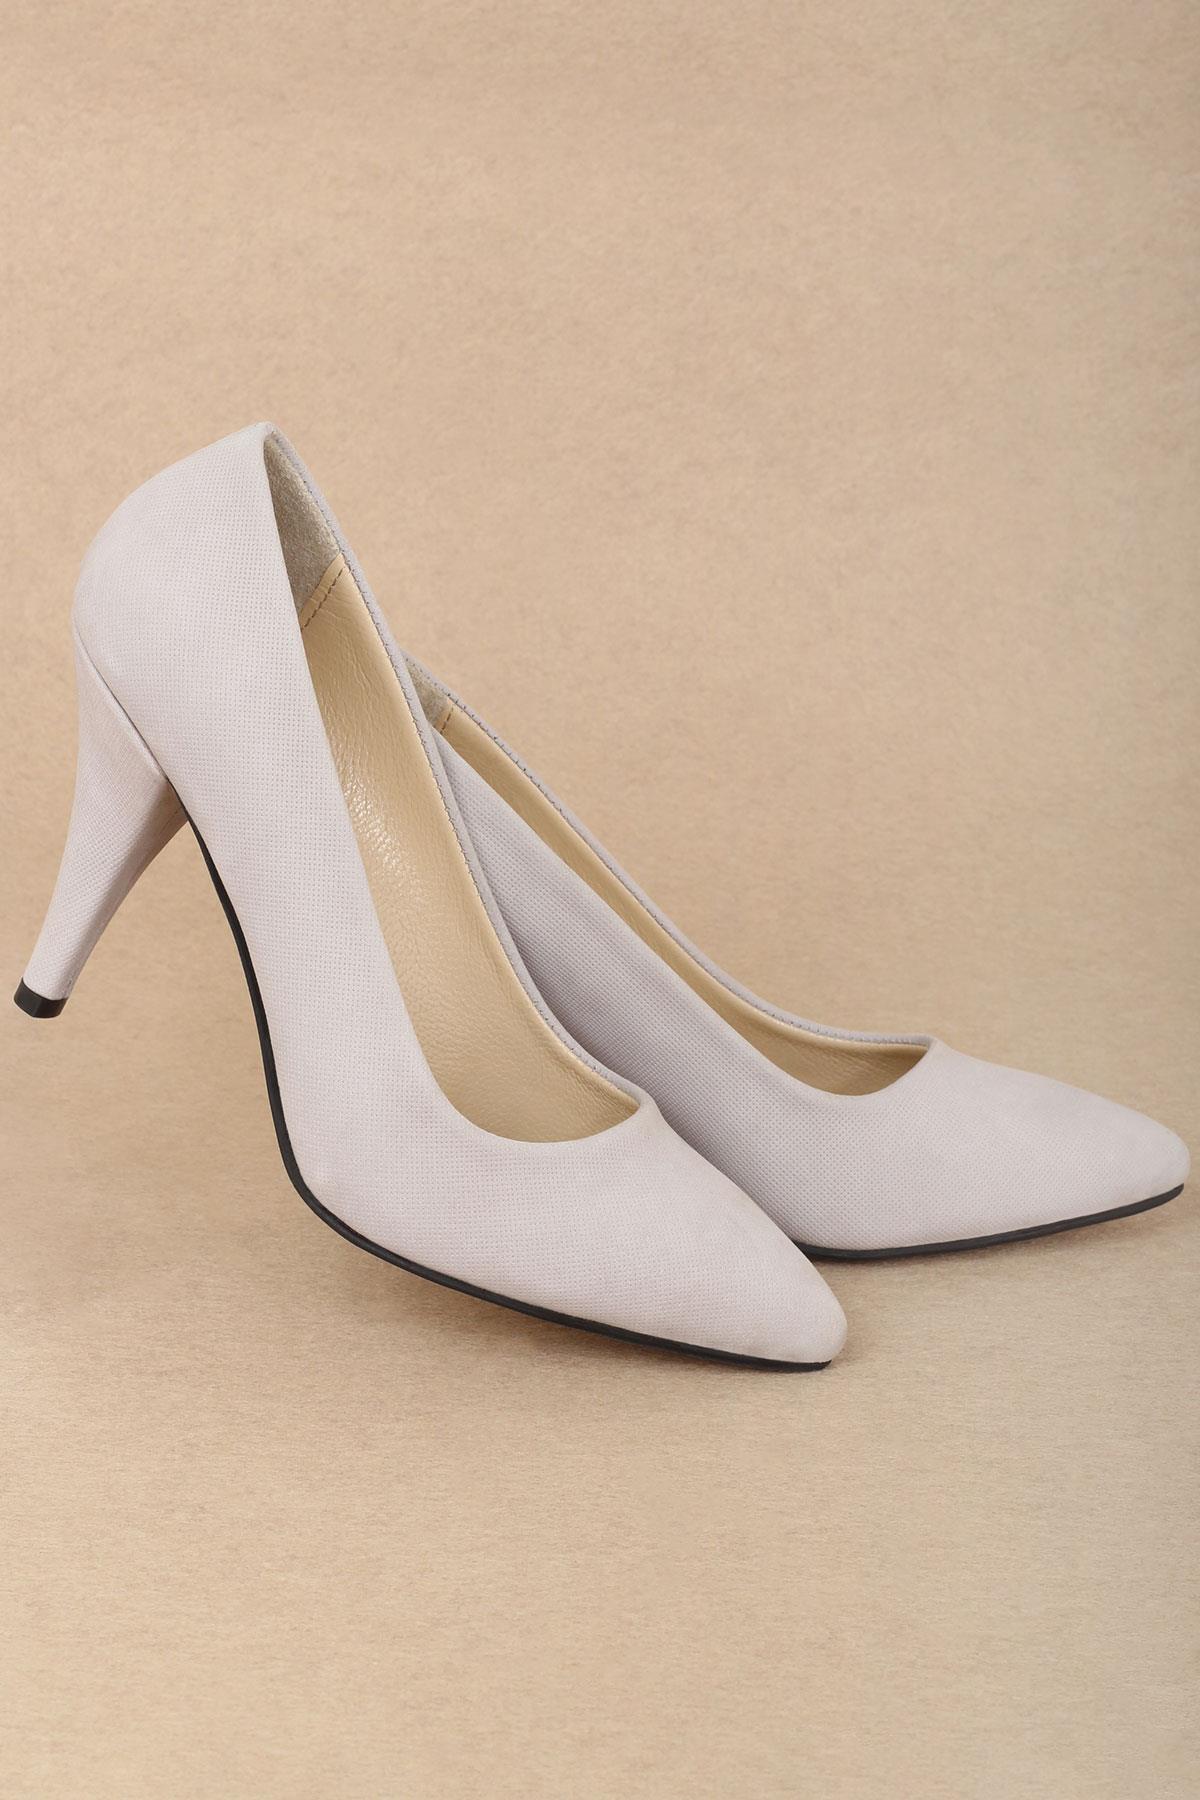 Women's Genuine Leather Heeled Shoes